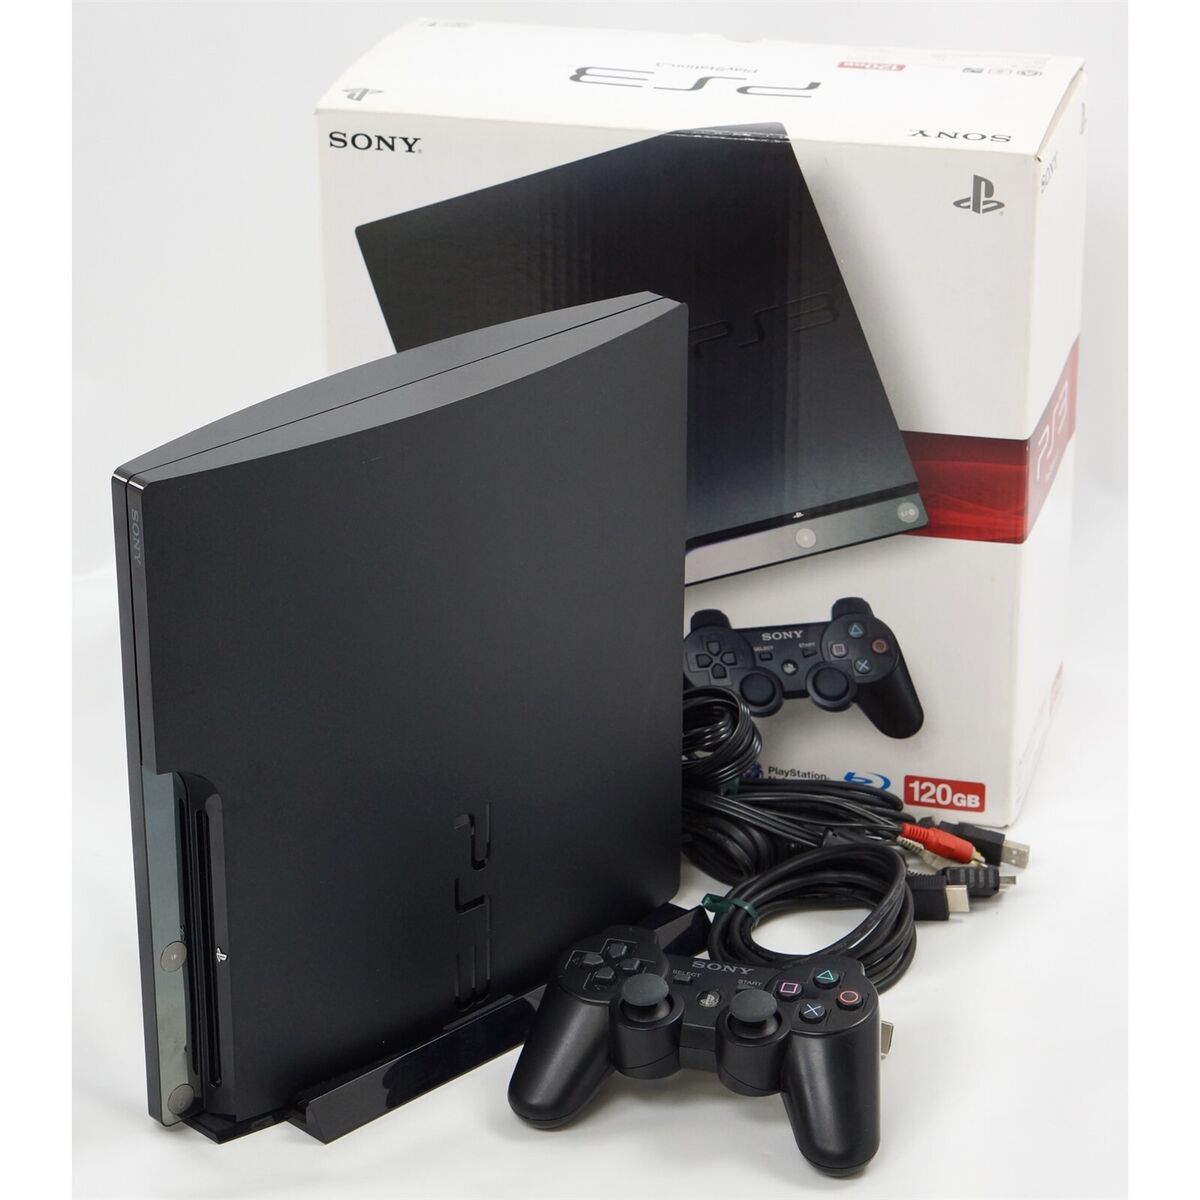 PS3 Playstation 3 Console CECH-2000A 120GB Tested System NTSC-J Ref 27453252